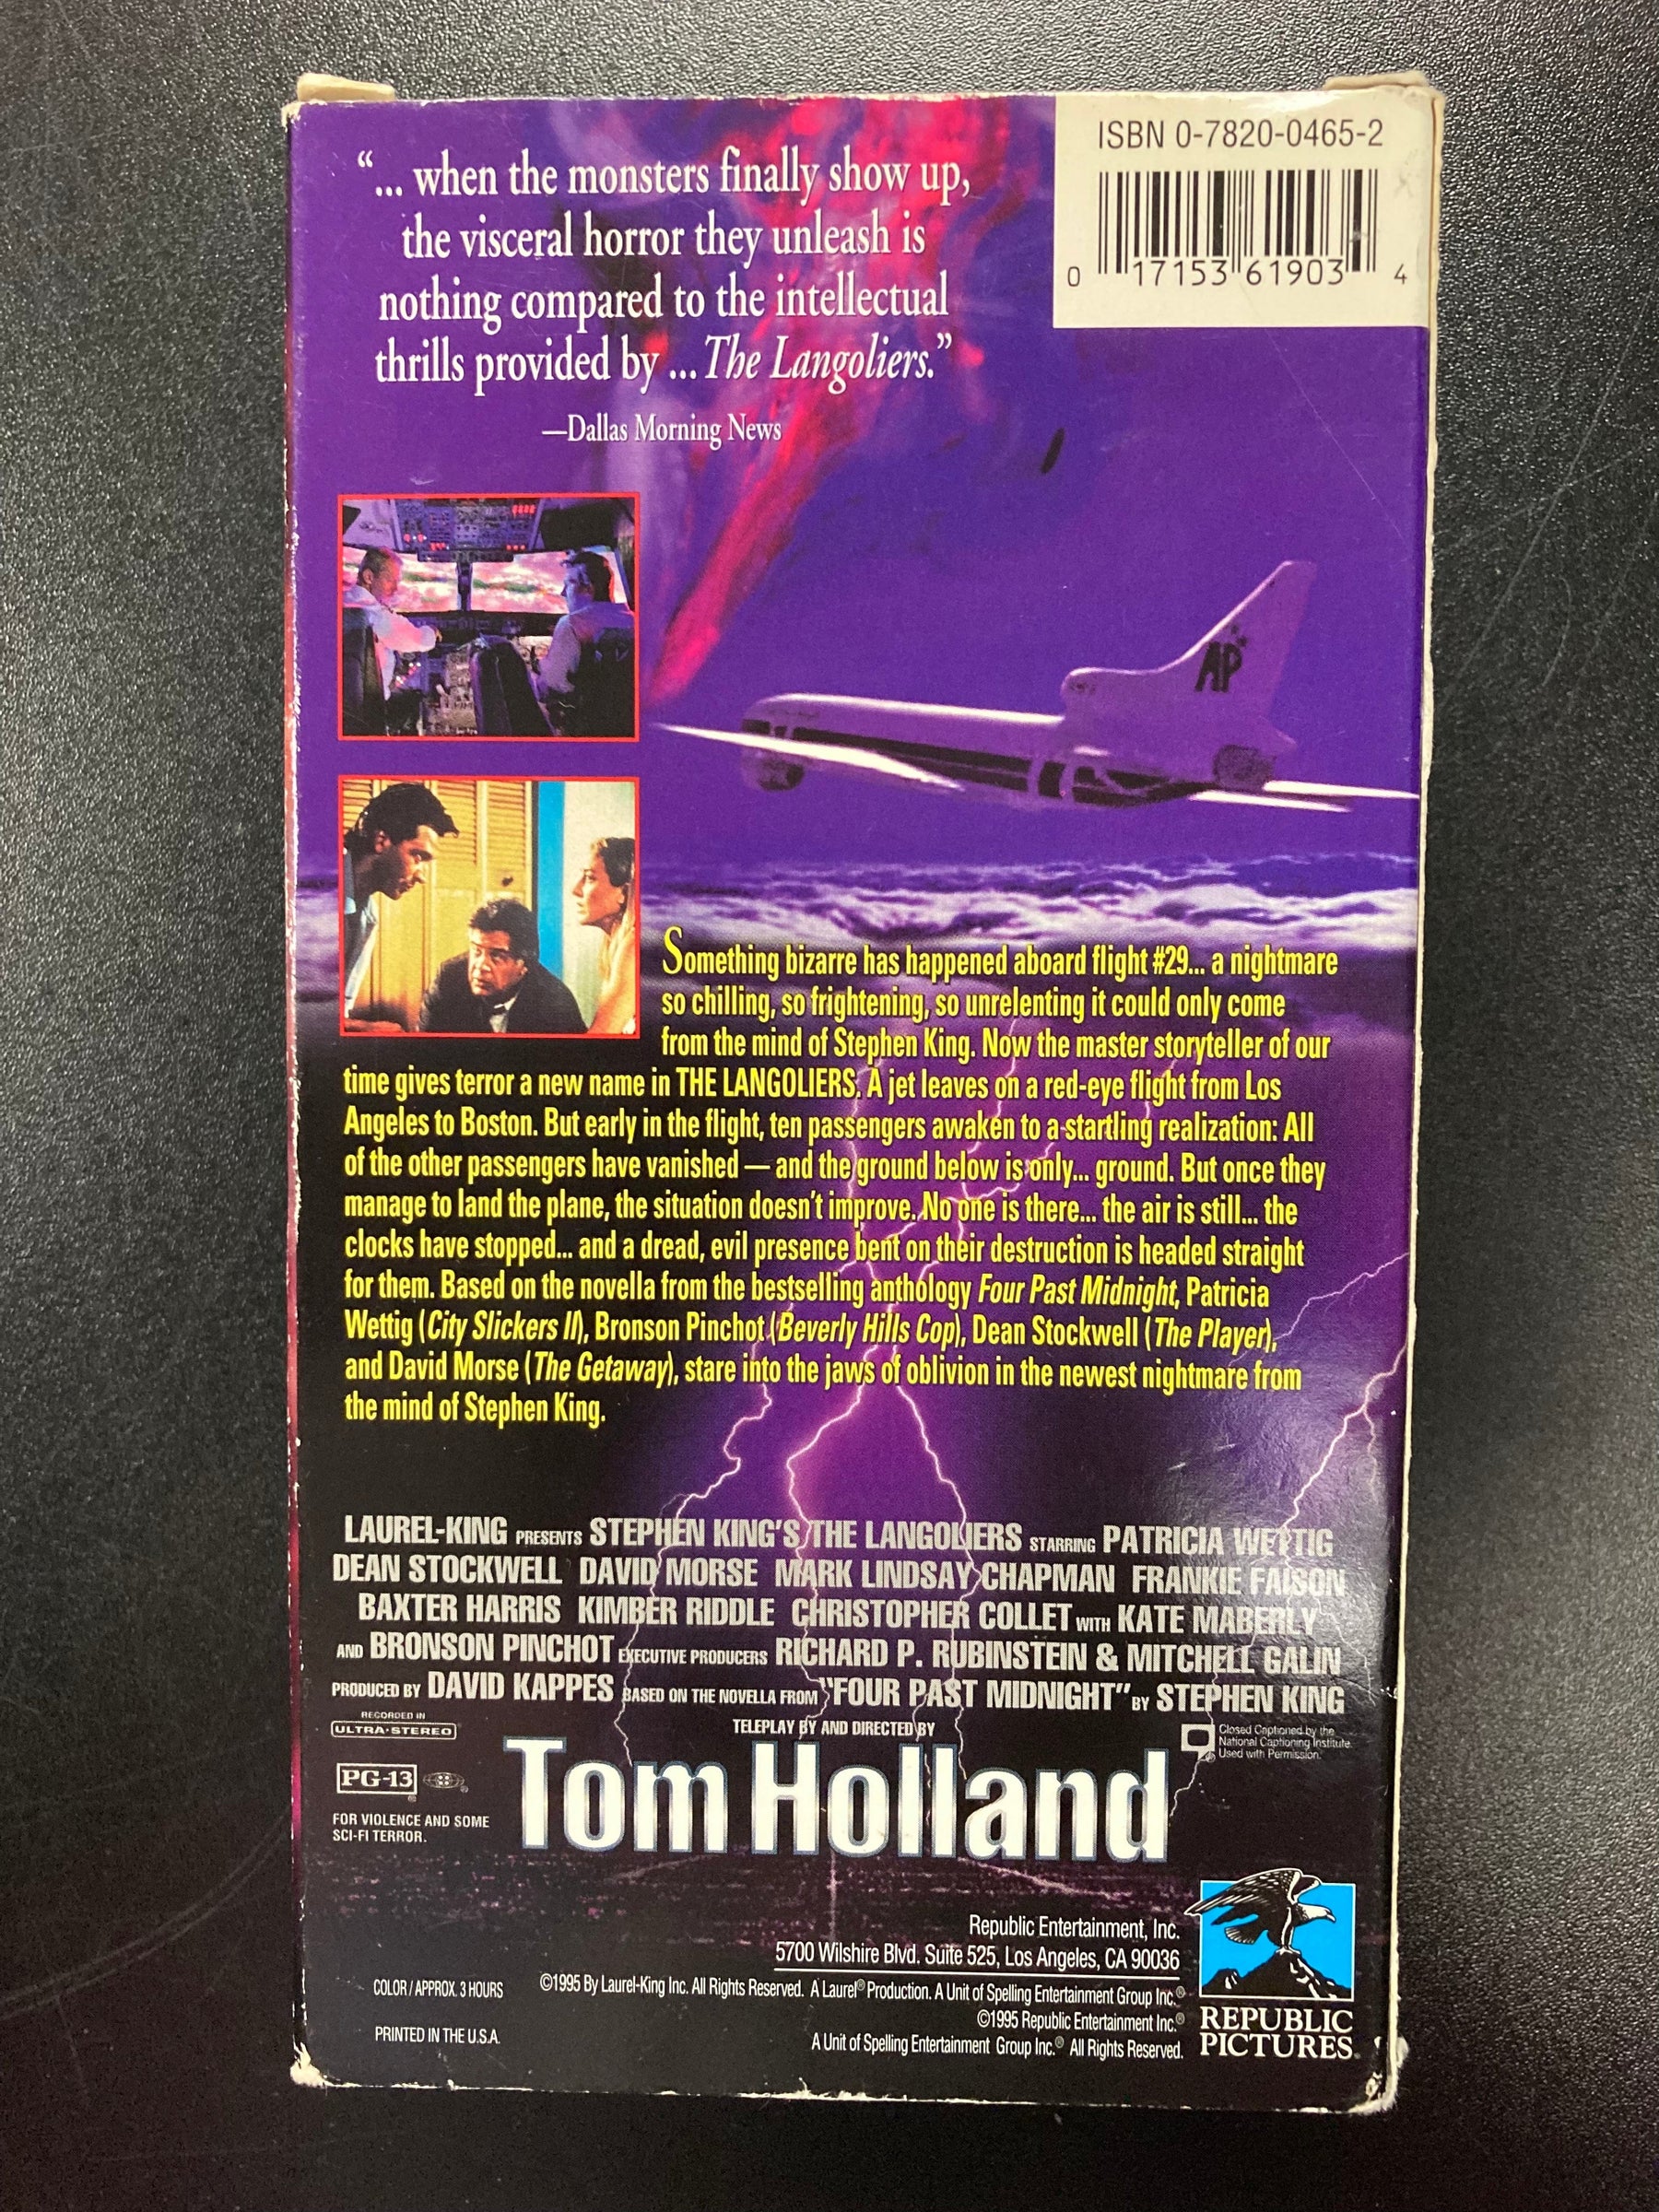 VHS: Stephen King's The Langoliers - Third Eye